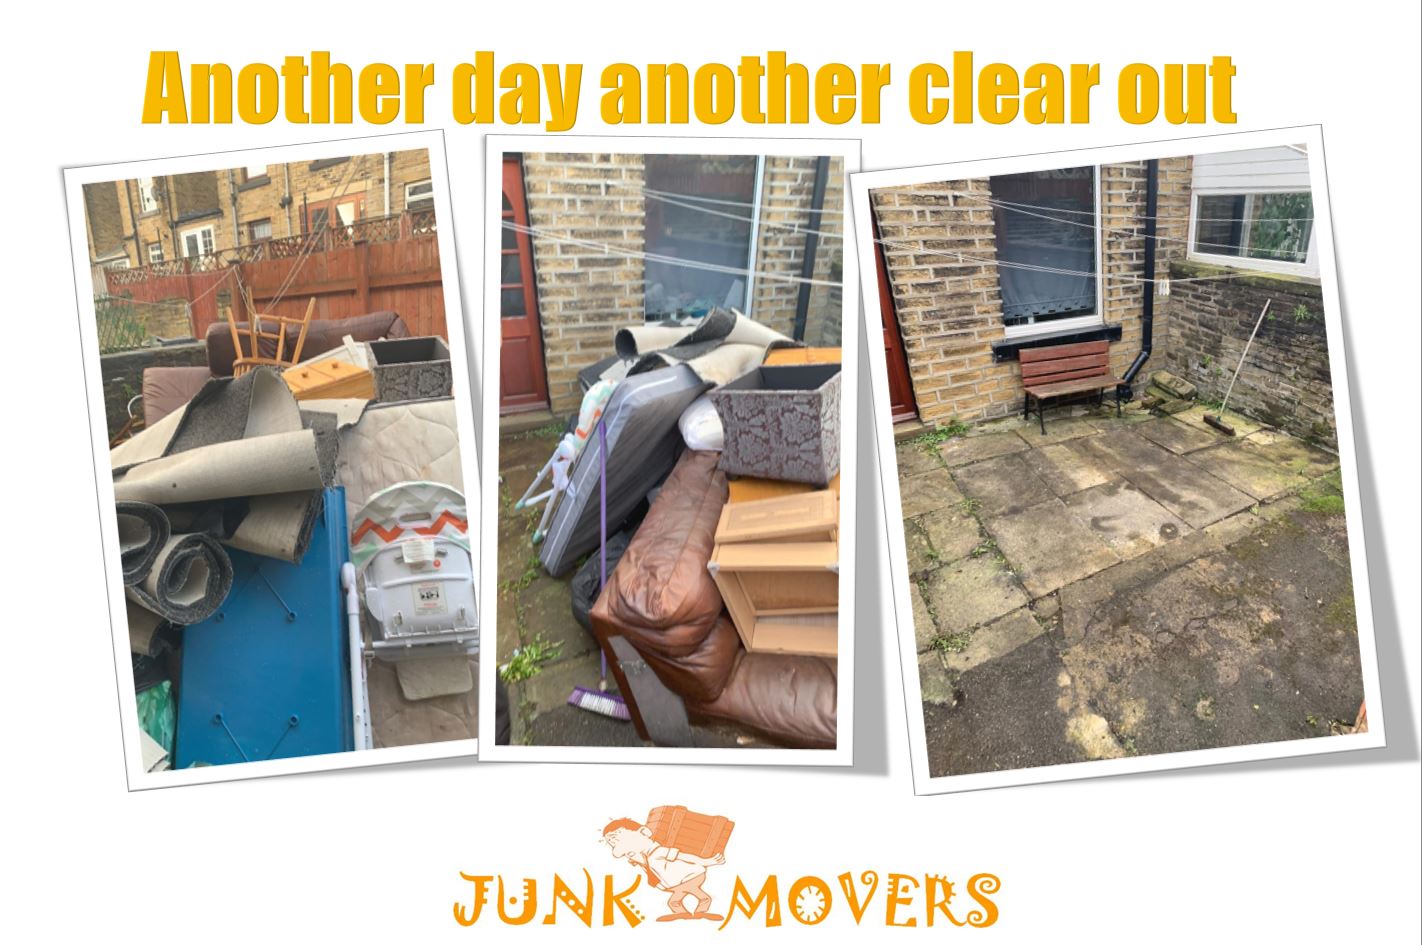 Junk Collections Todmorden, Junk Movers West Yorkshire Ltd